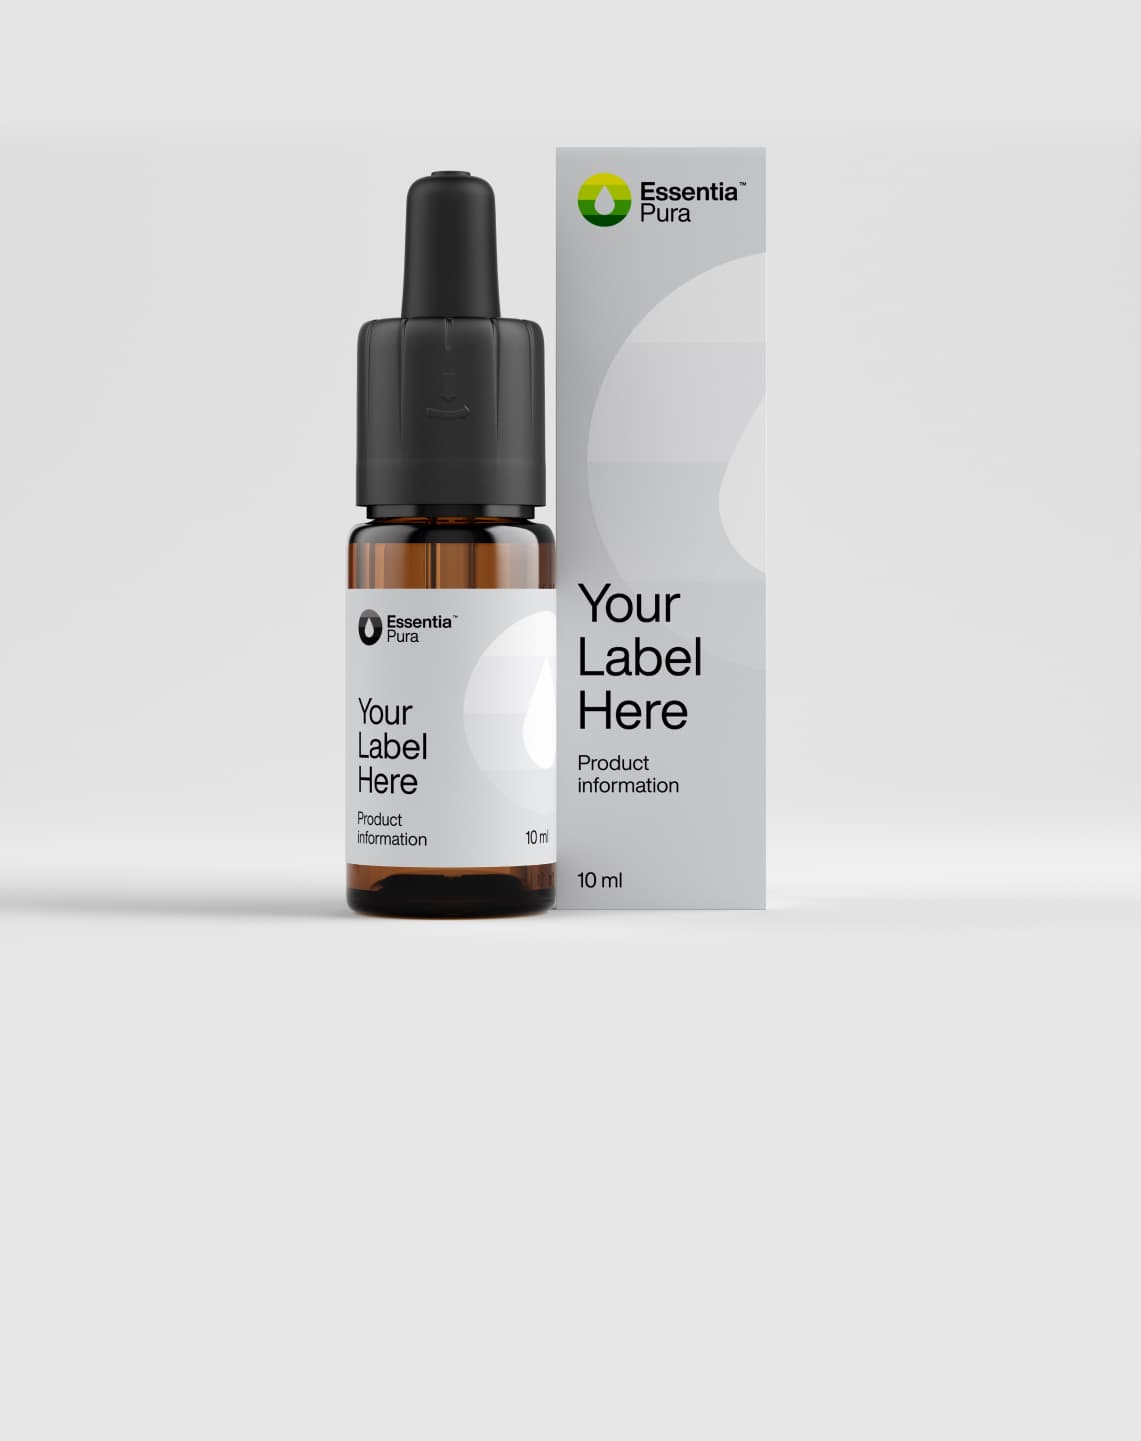 white label cbd product and packaing sample